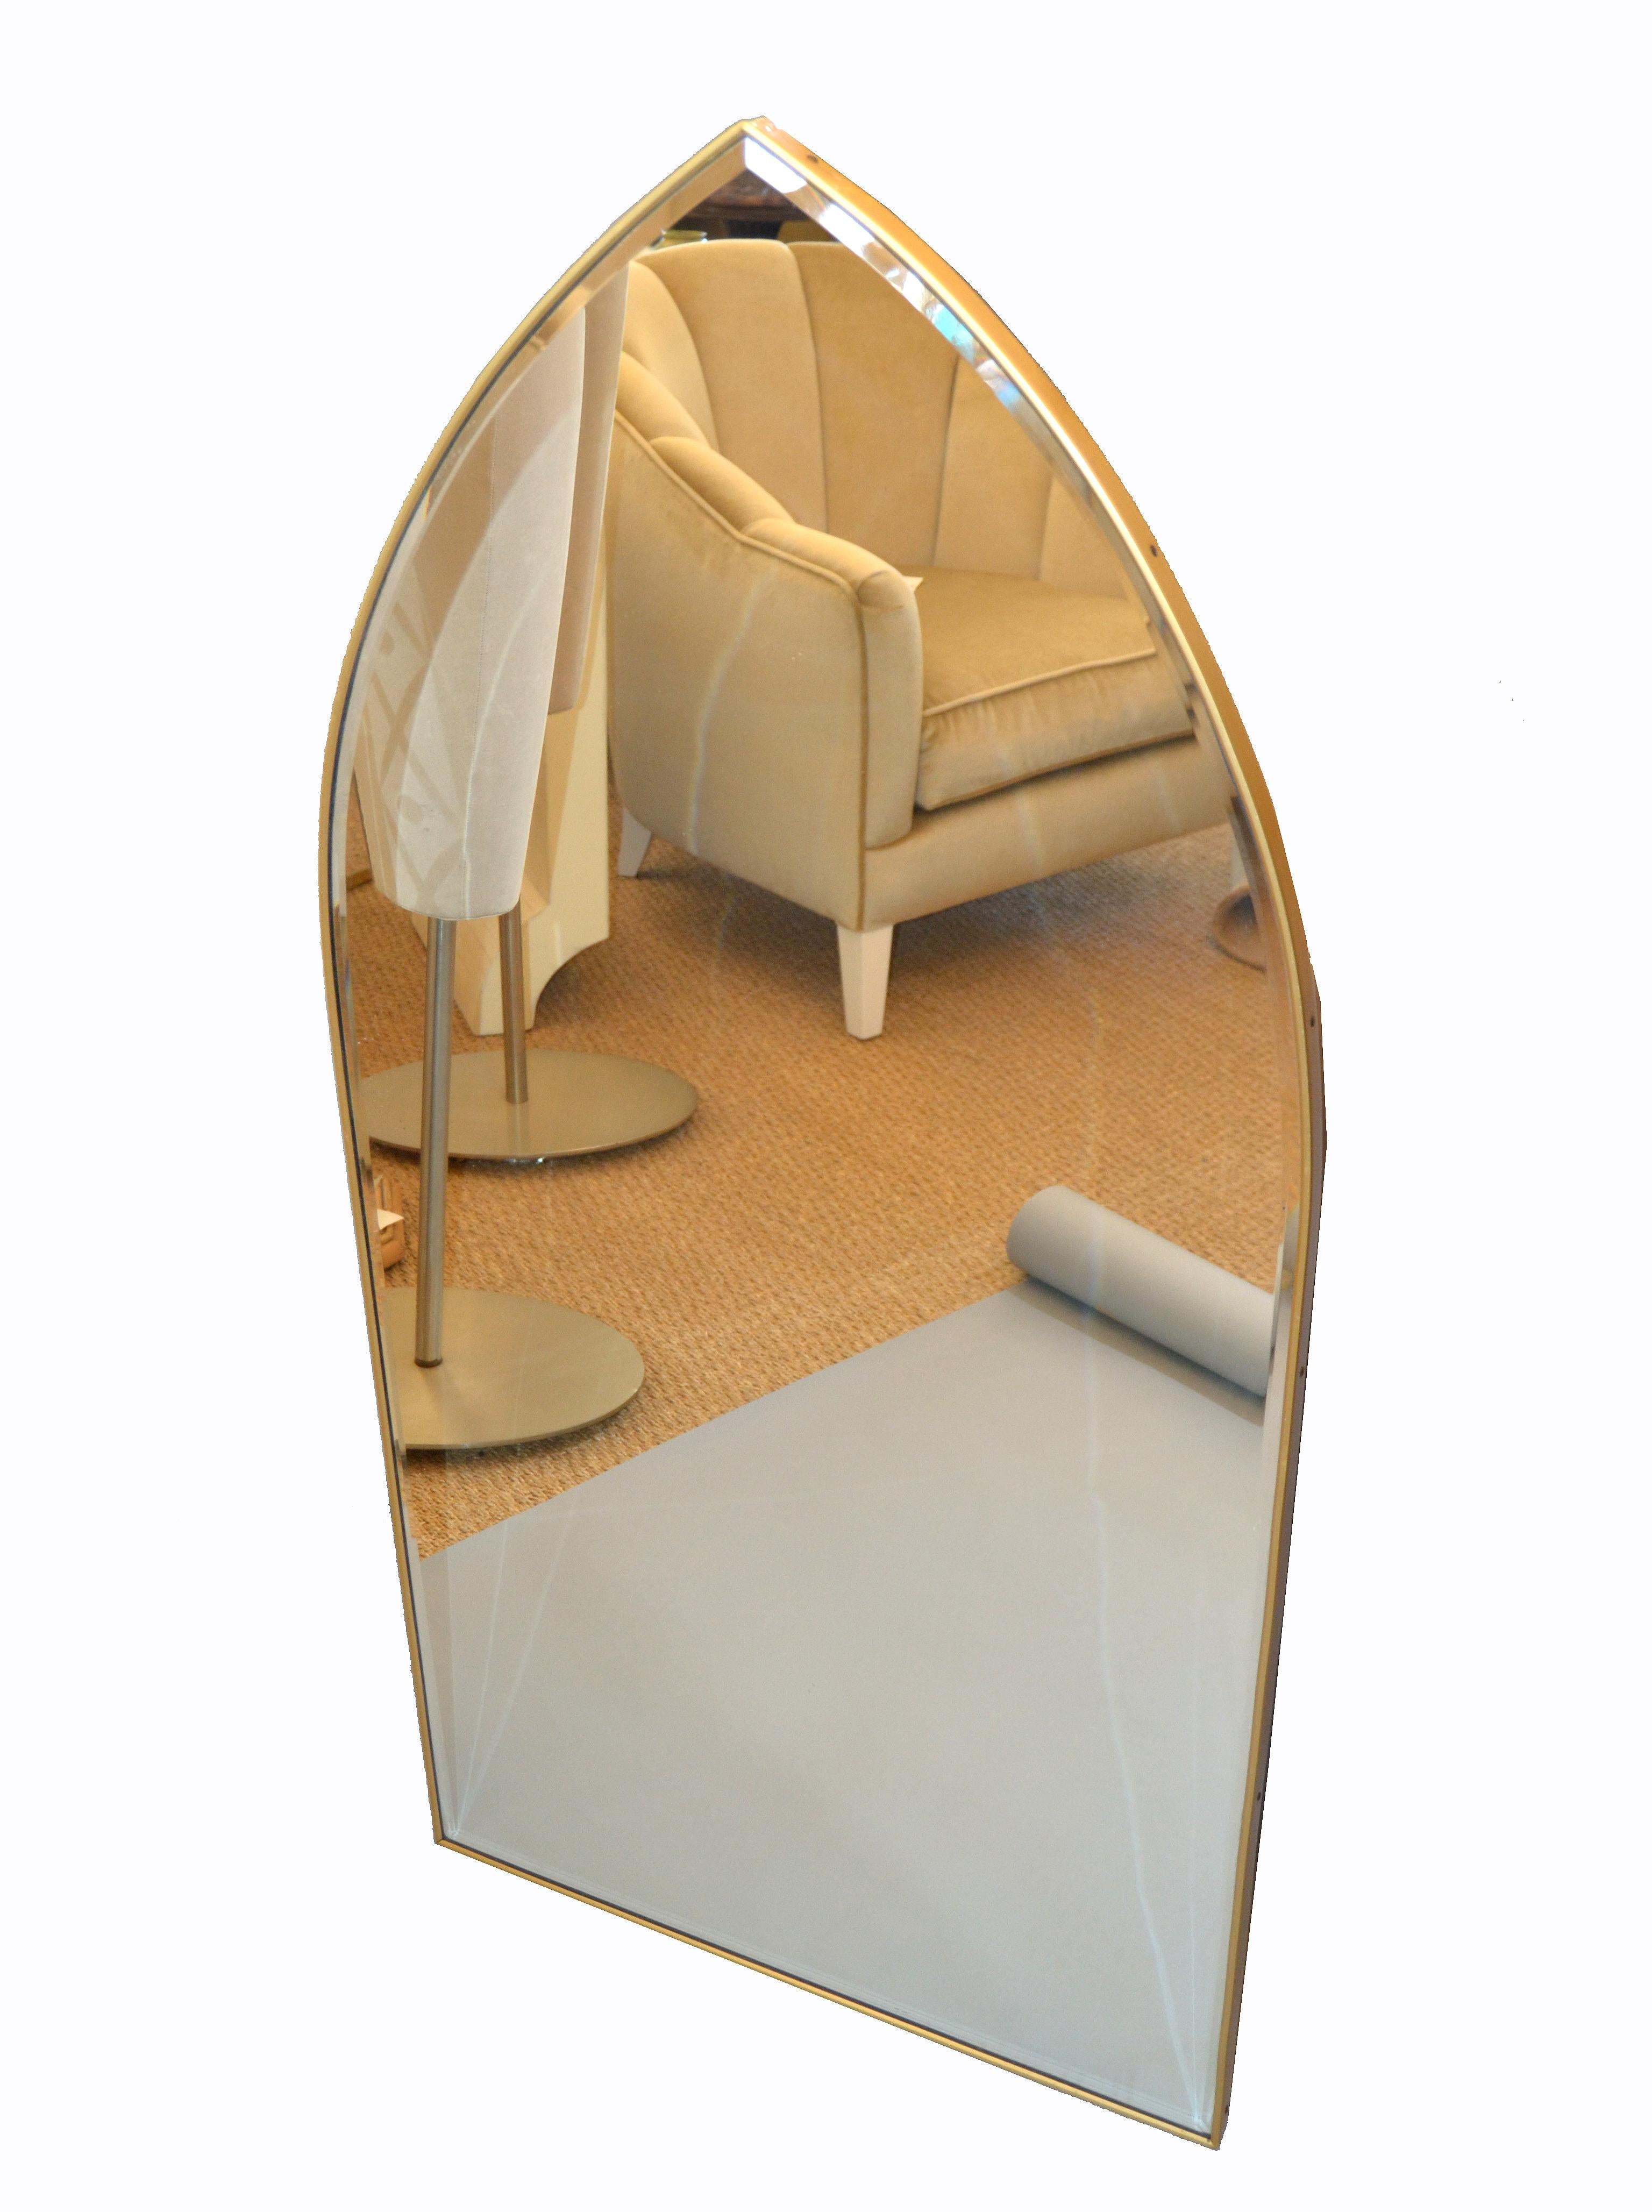 Large Hollywood Regency Gothic arch wall mirror from Italy.
The mirror is bevelled and framed with brass.
This stunning piece fits to any interior.